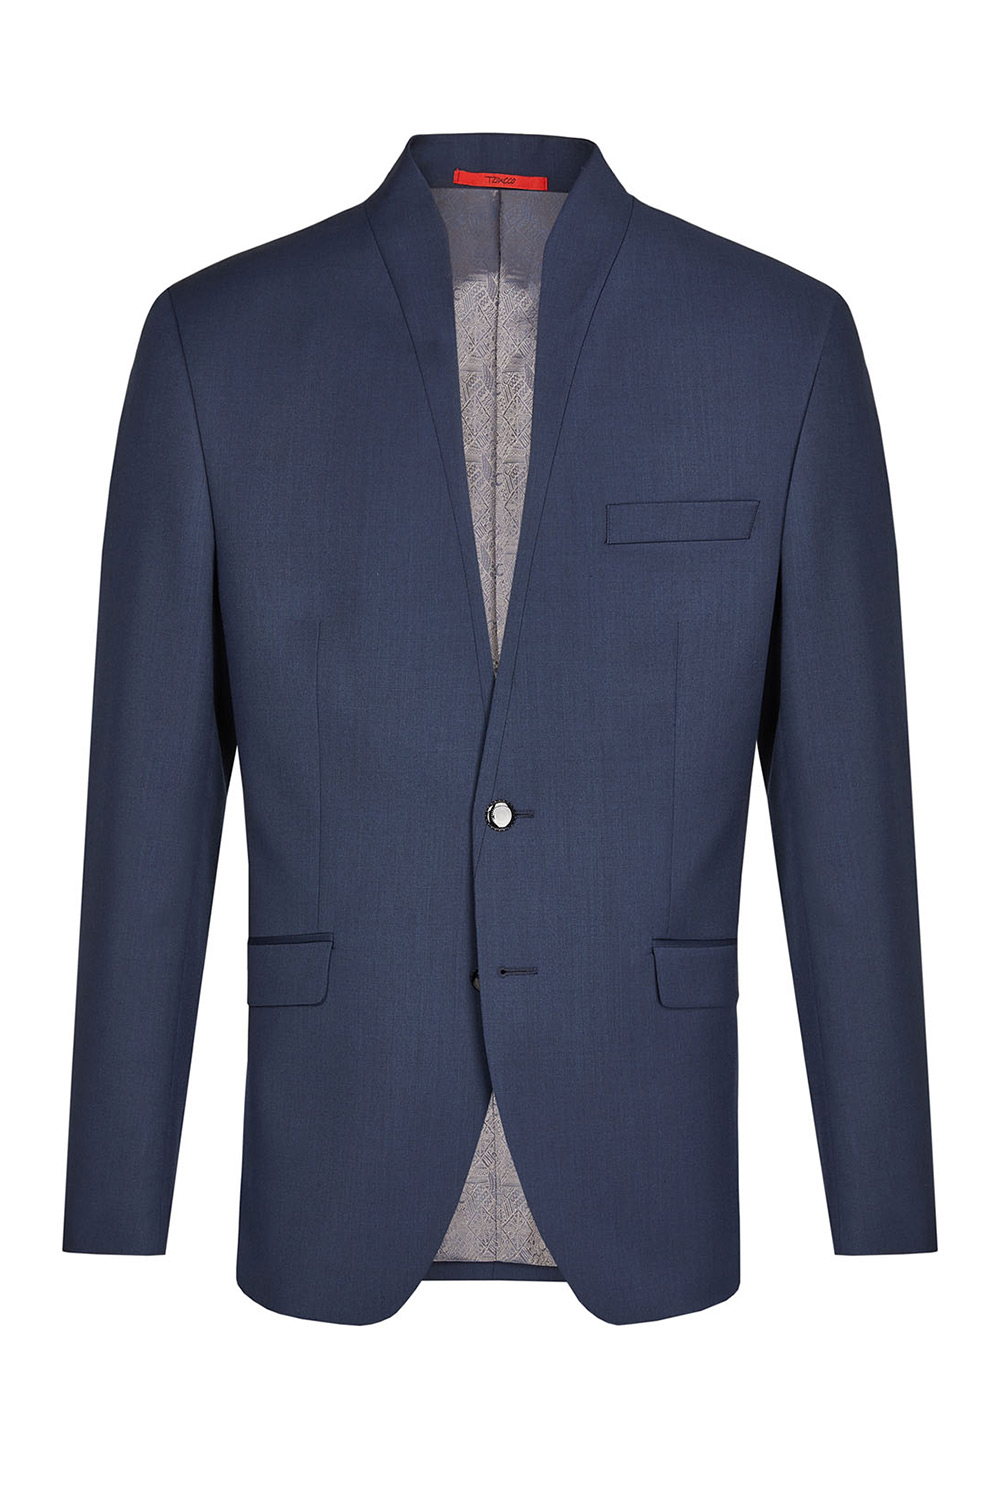 Royal Blue 3 Piece Suit - Tom Murphy's Formal and Menswear